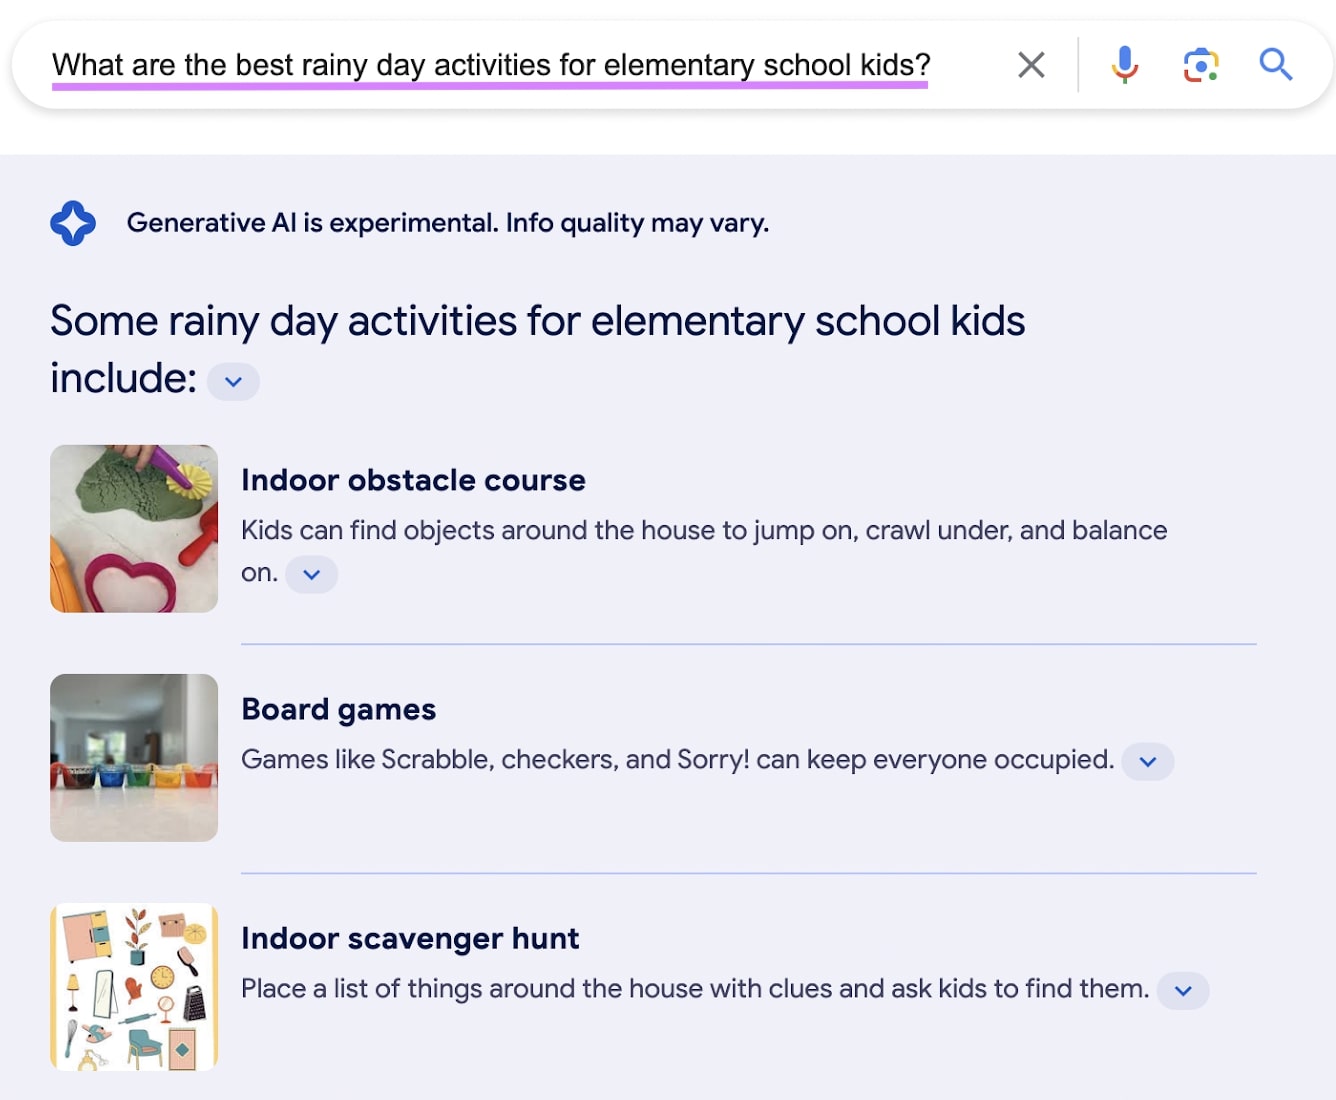 Google generative AI's response to "What are the best rainy day activities for elementary school kids?" prompt